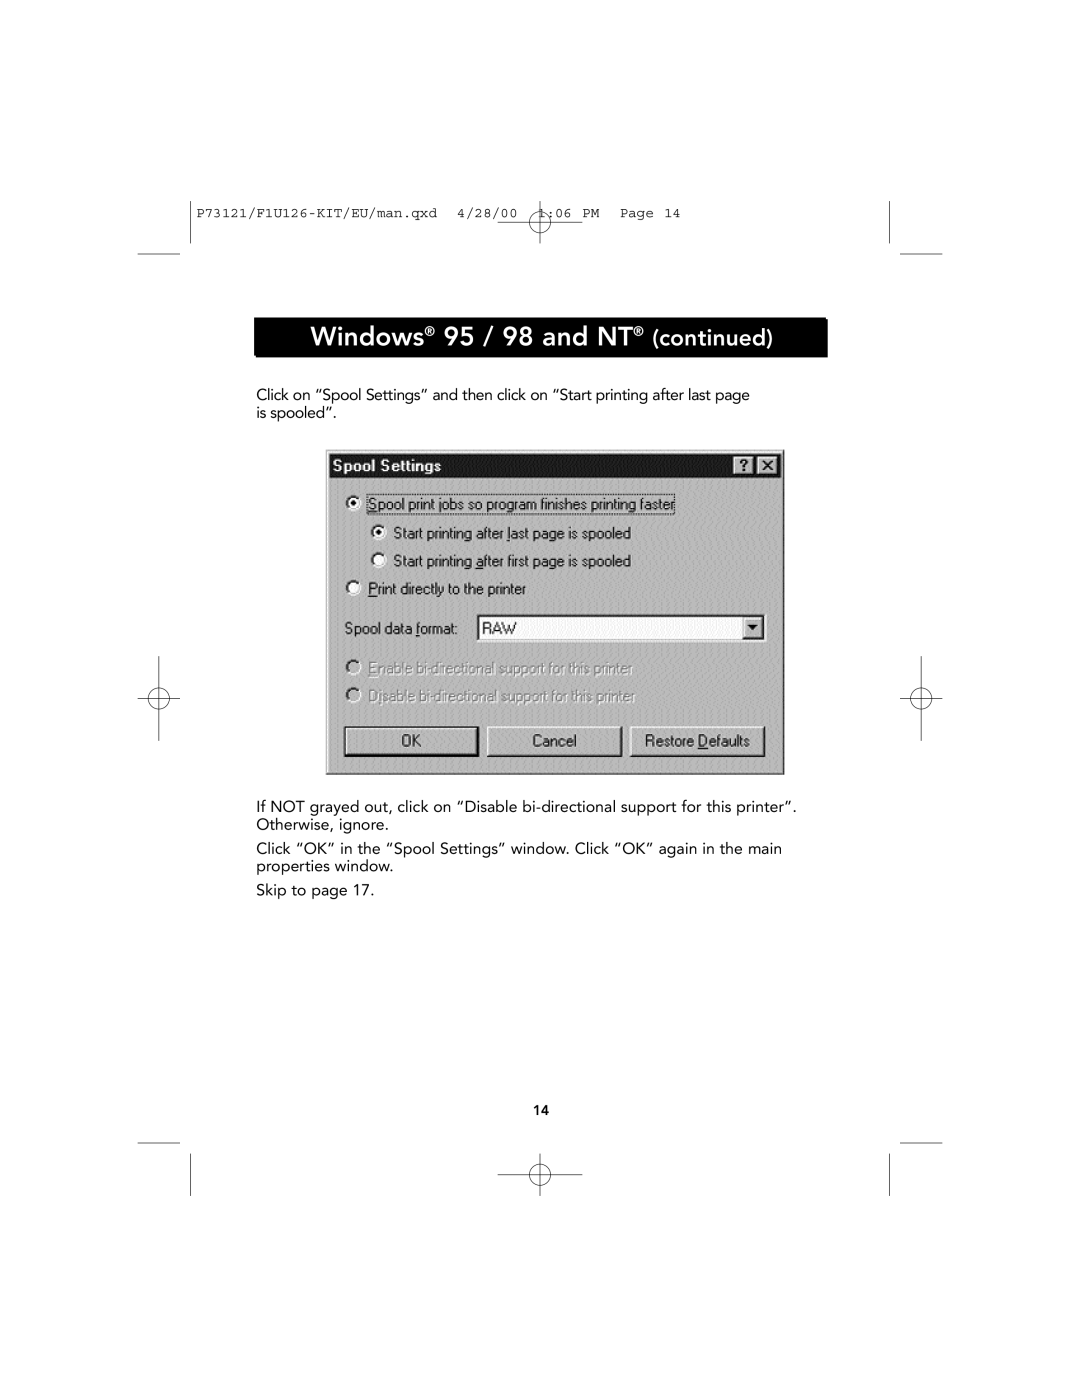 Belkin P73121, F1U126-KIT user manual Windows 95 / 98 and NT continued, Skip to page 